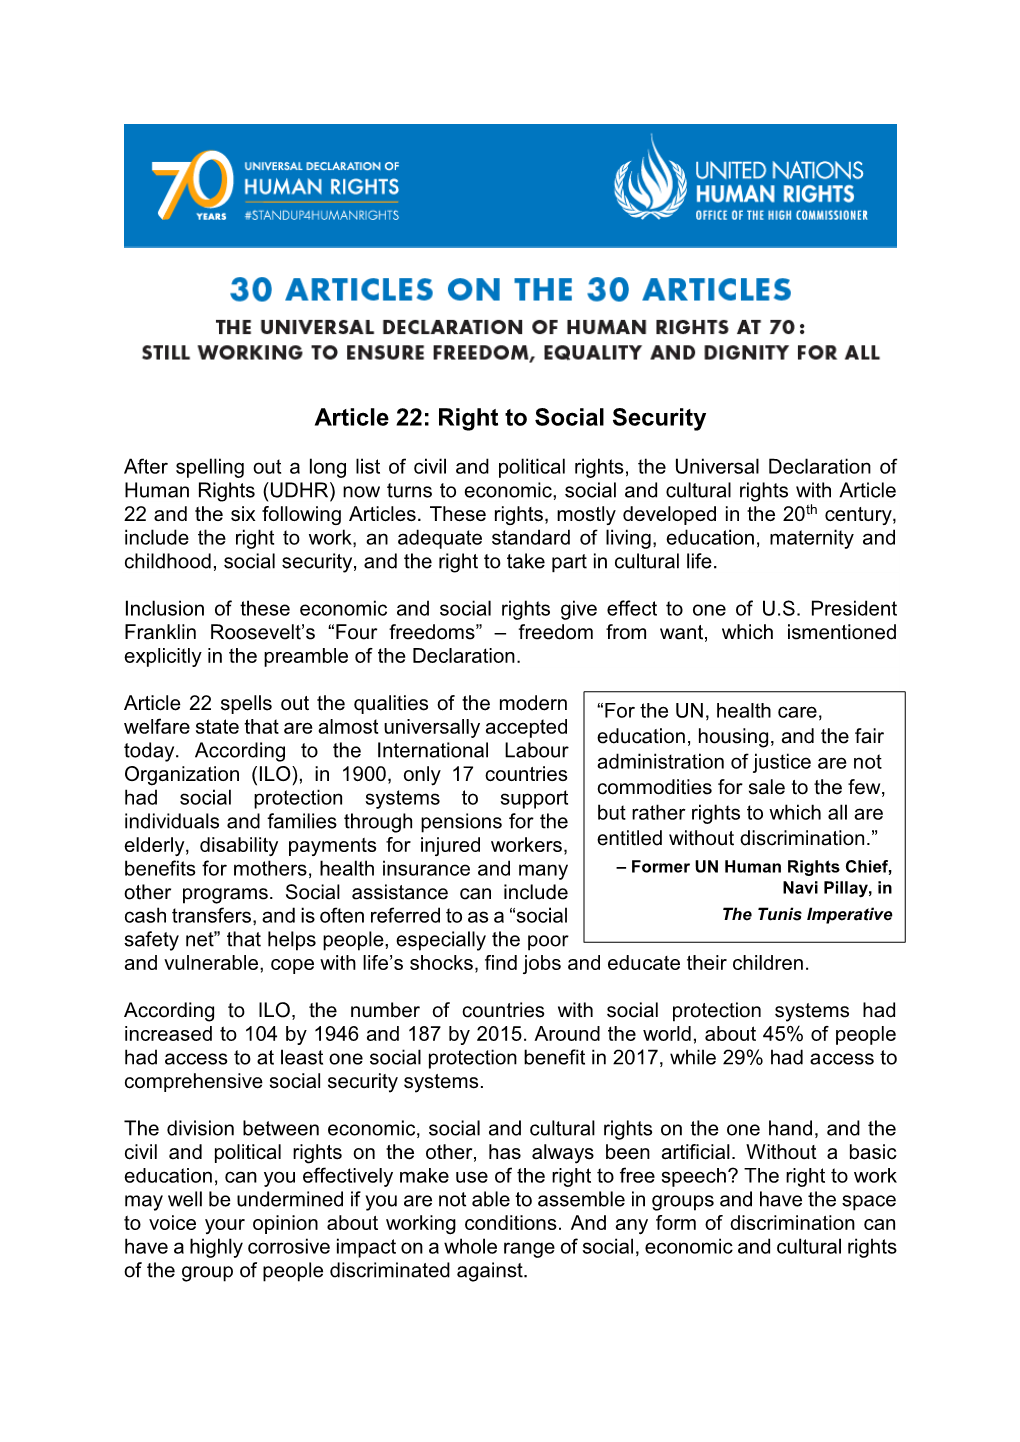 Article 22: Right to Social Security